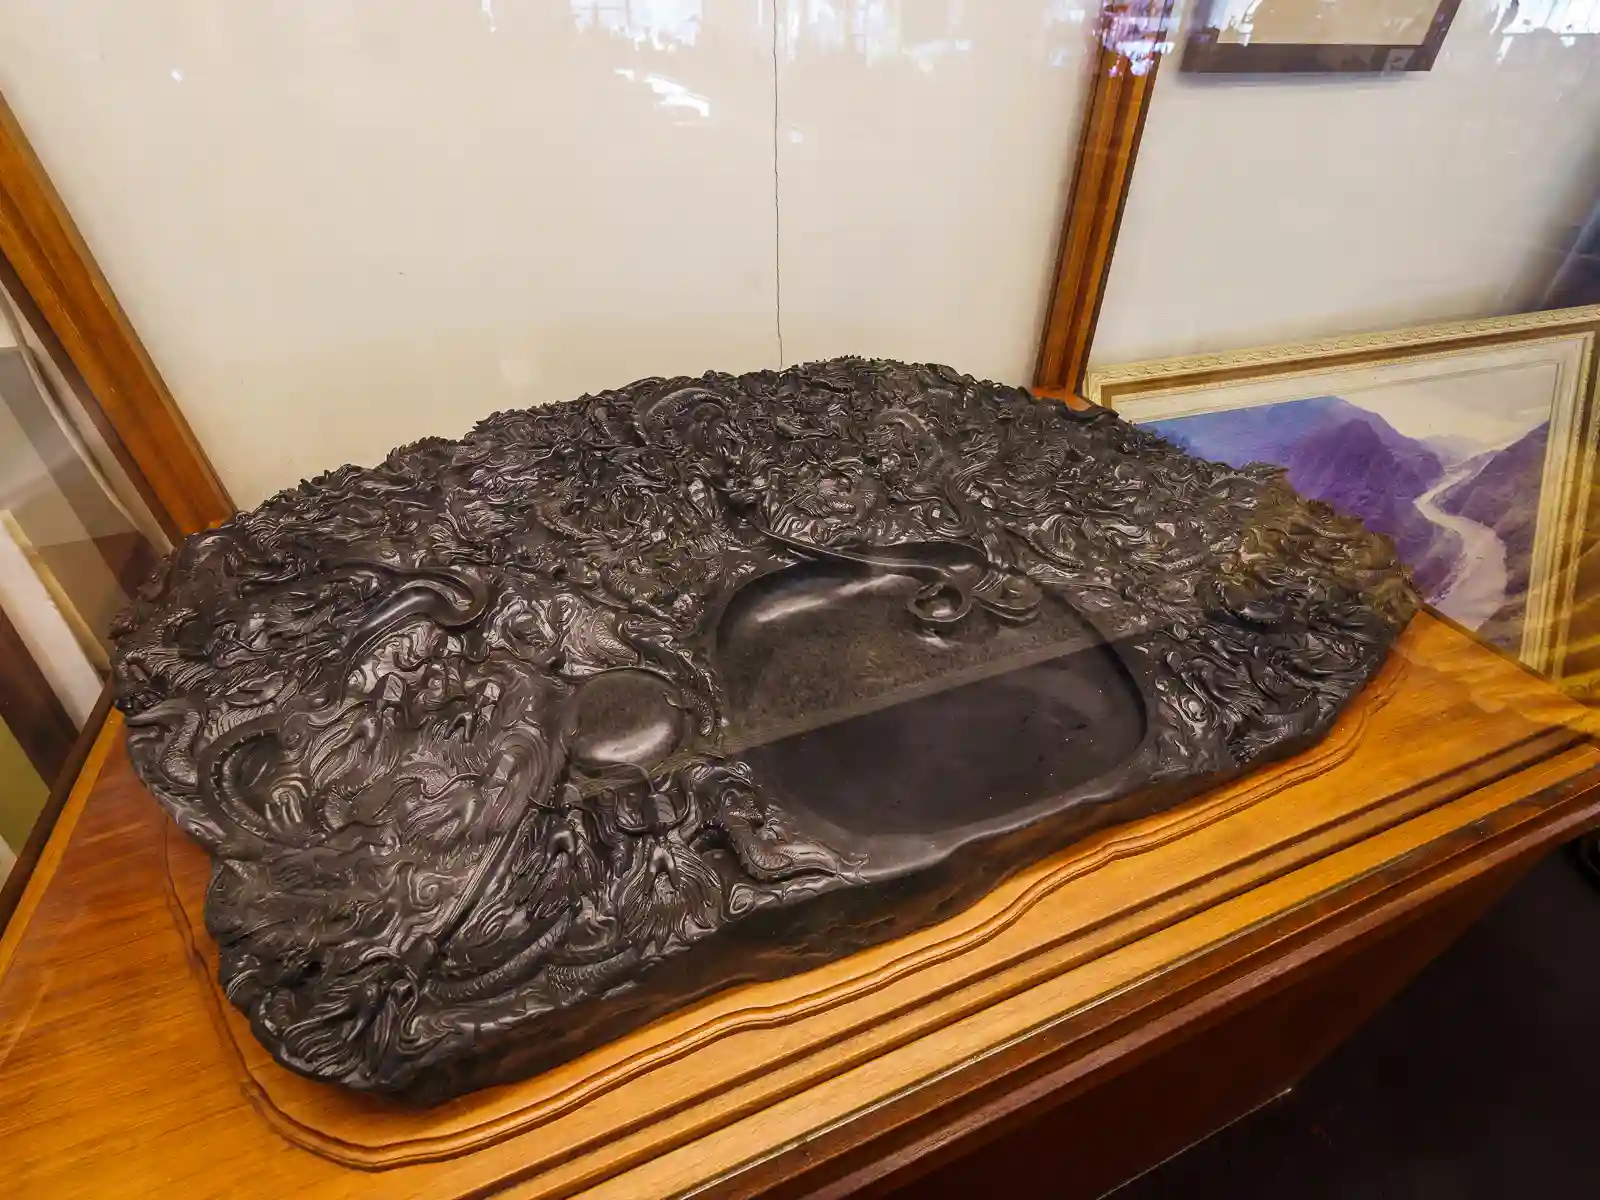 An inkstone with very intricate stone carvings on display.